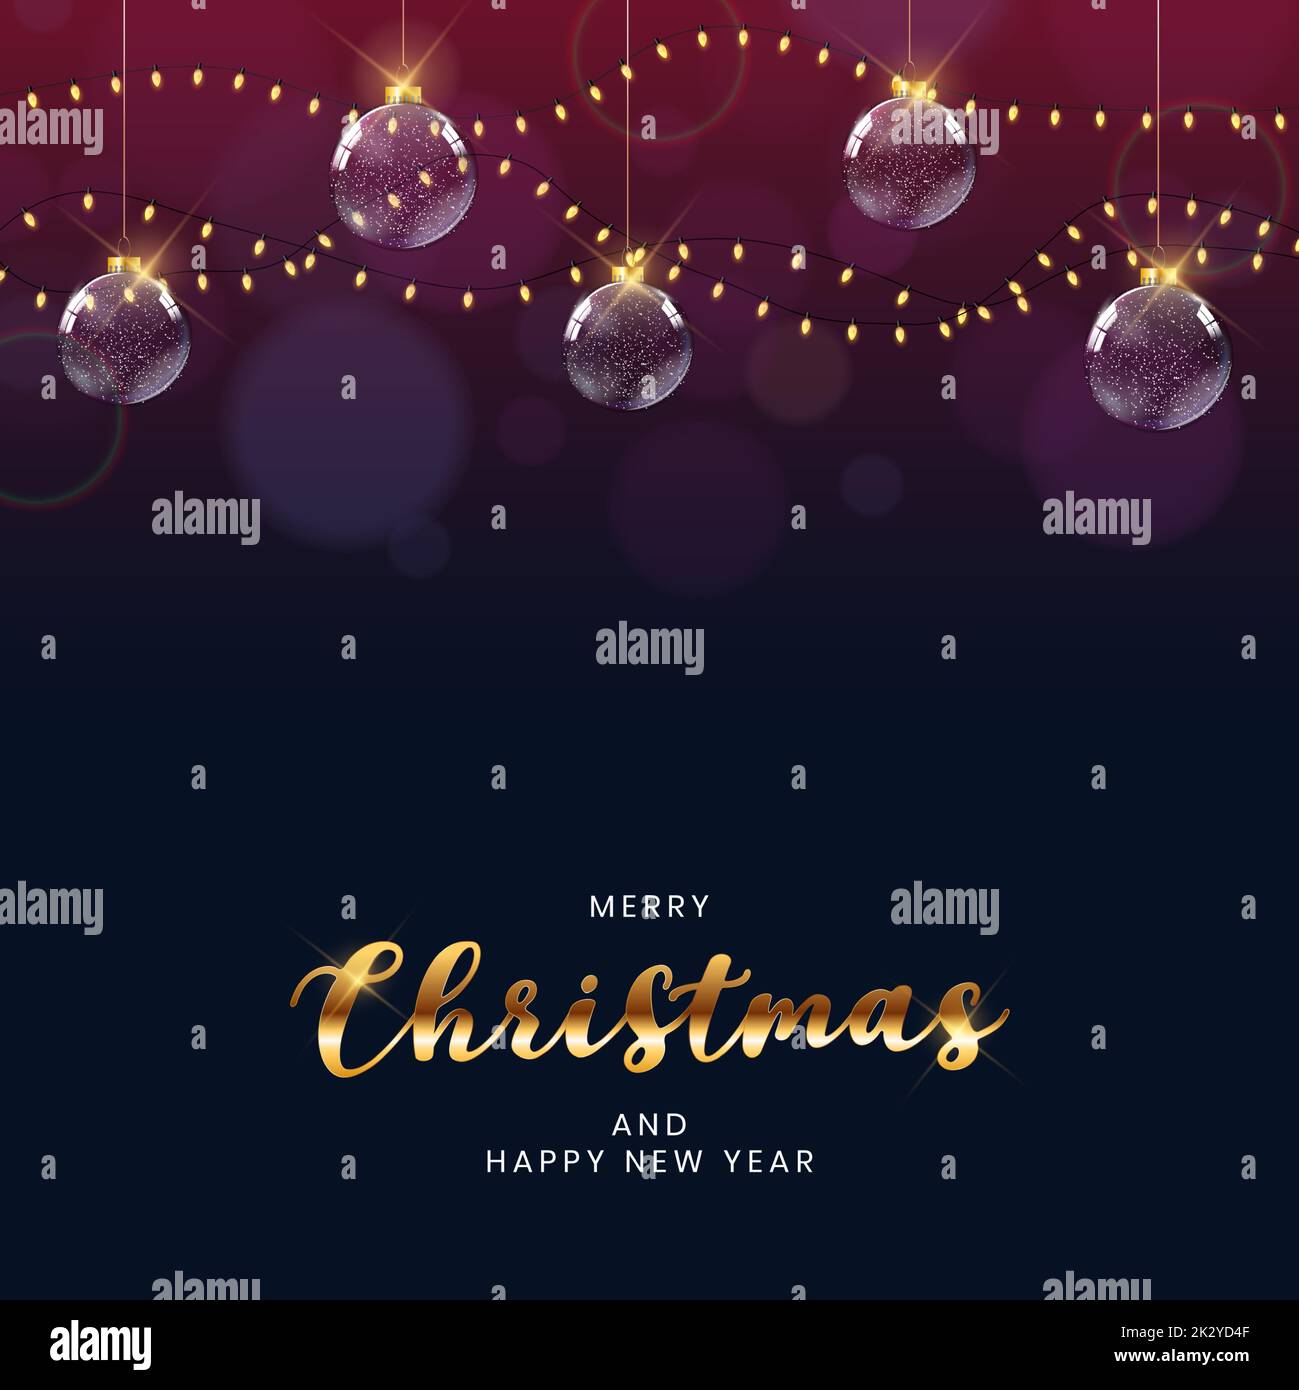 Christmas Holiday Party Background. Happy New Year and Merry Christmas Poster Template. Vector Illustration Stock Vector